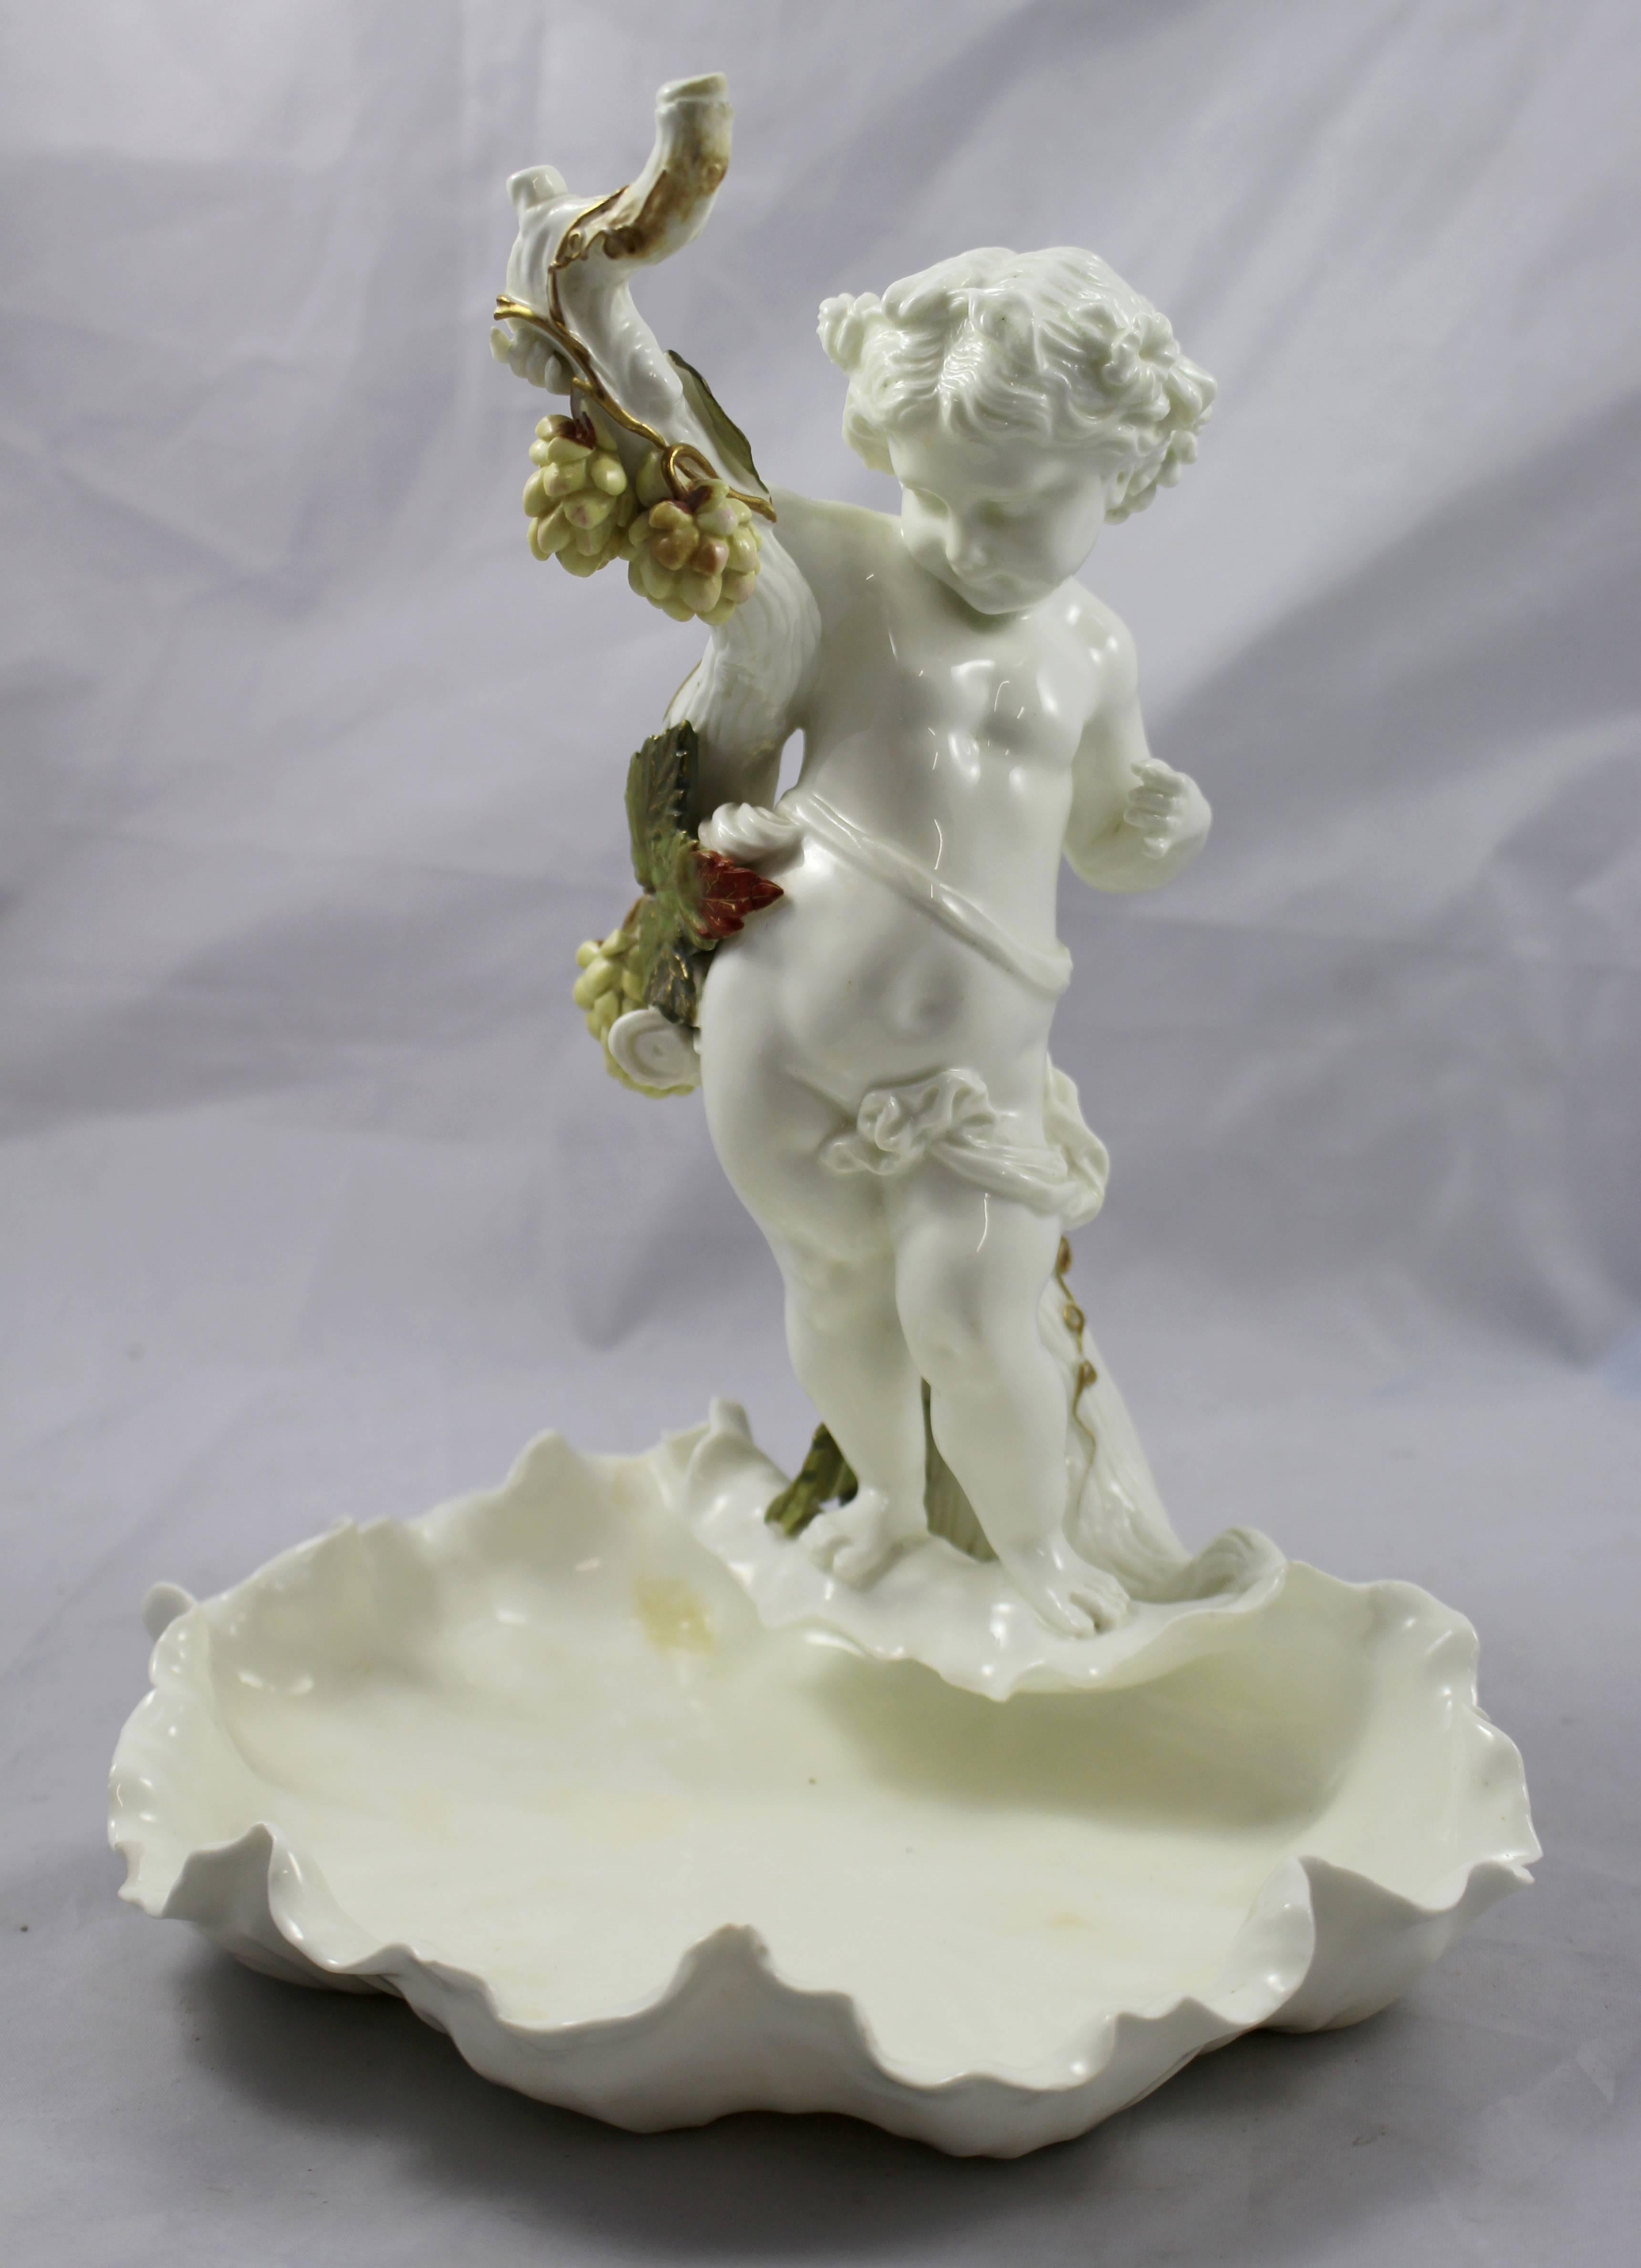 Manufacturer Moore Brothers.
Composition Porcelain.
Measures: Height 25 cm / 10 in.
Backstamp stamped Moore Bros in red with registration number.
Condition good condition. Three nibbles to the dish border. Small damage to a finger on each hand.